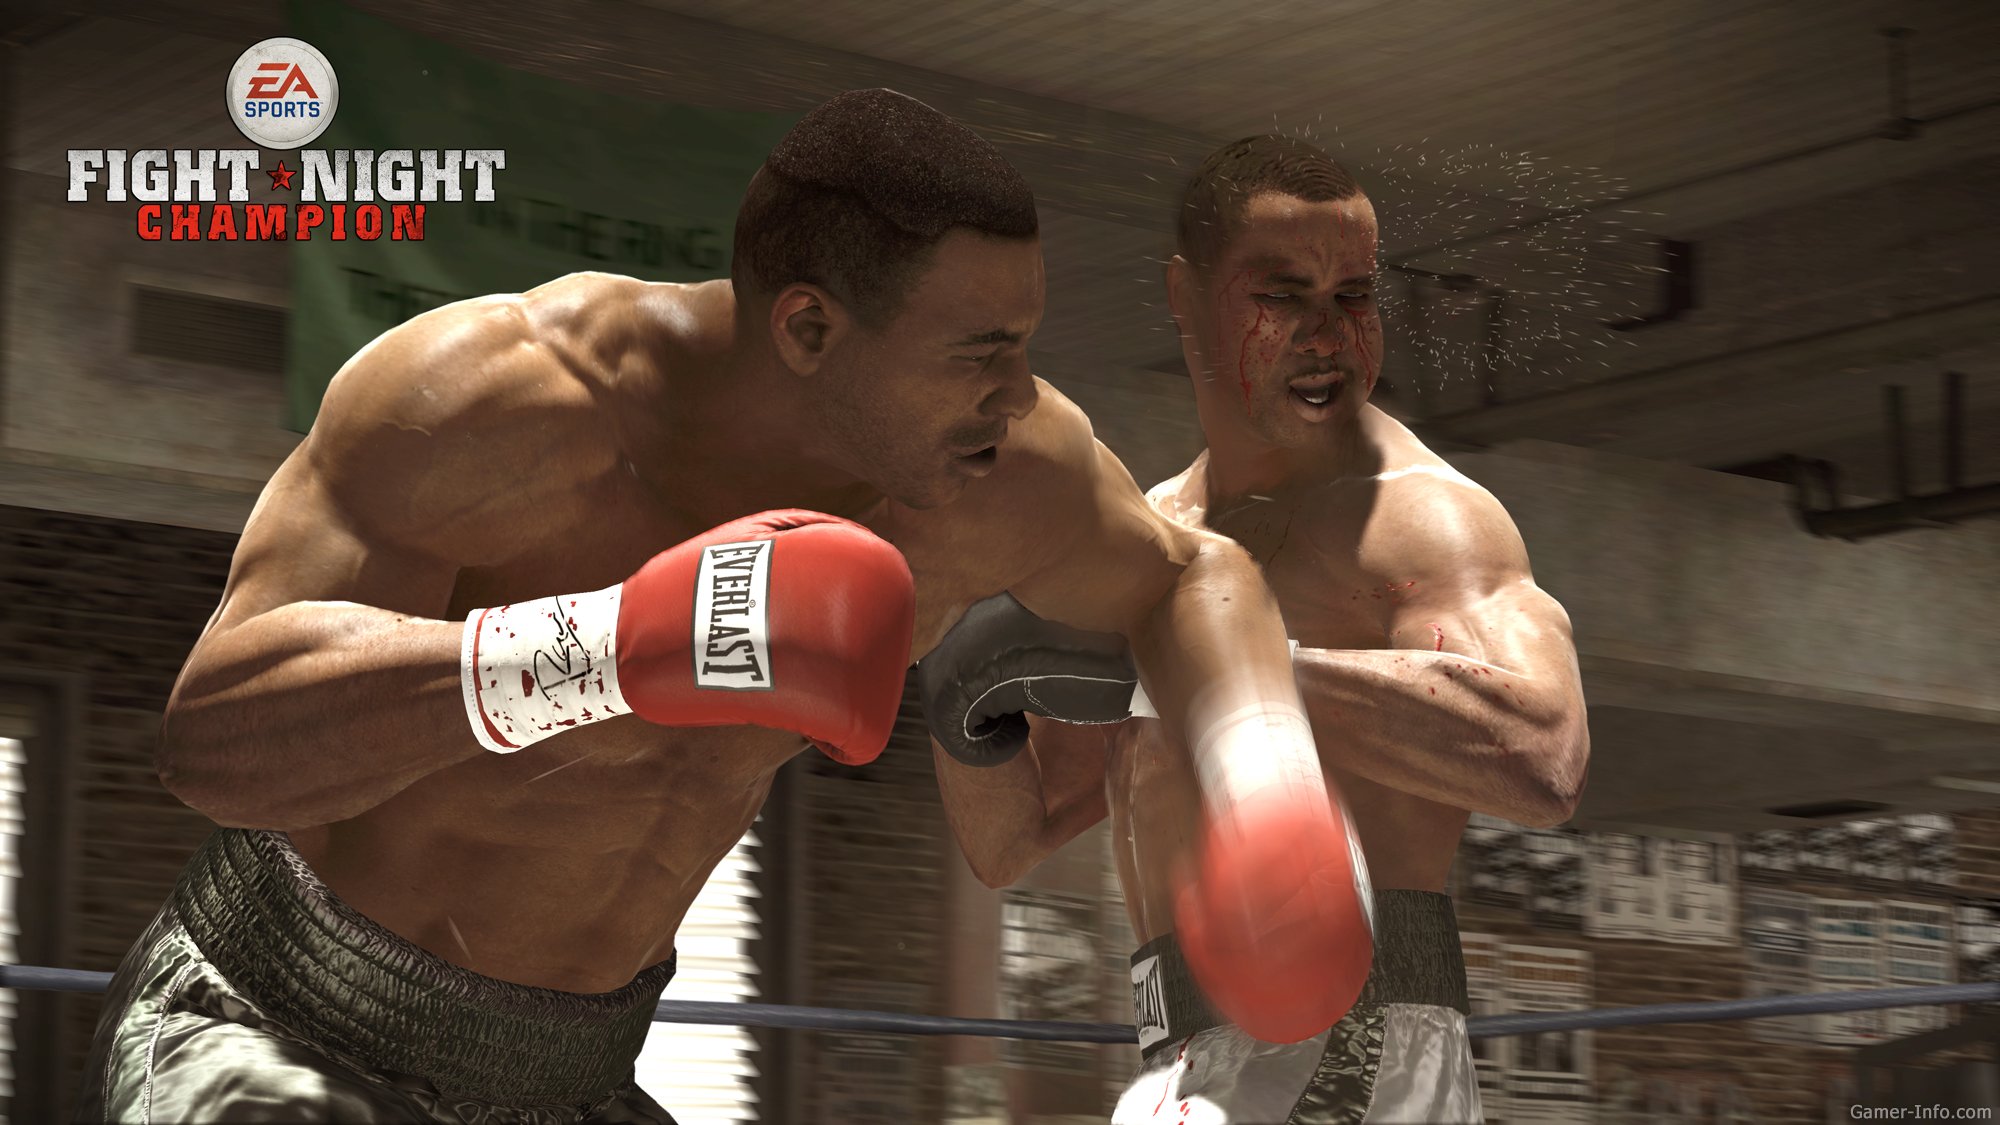 can you play fight night champion on pc reddit